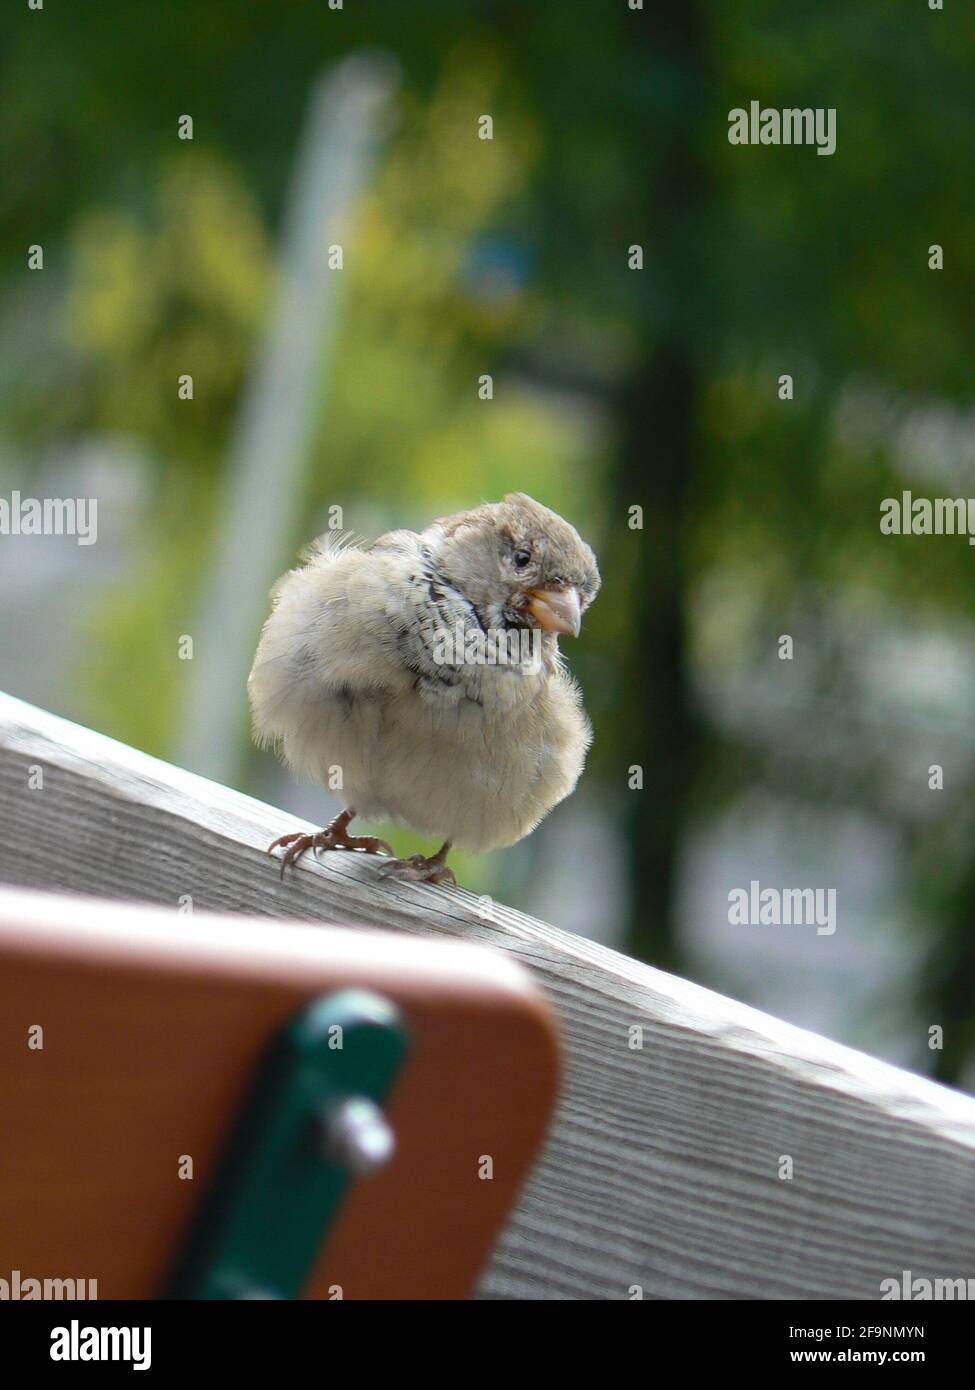 Friendly little brown bird: fluffy feathers, inquisitive head looking to one side, standing on a wooden fence panel Stock Photo